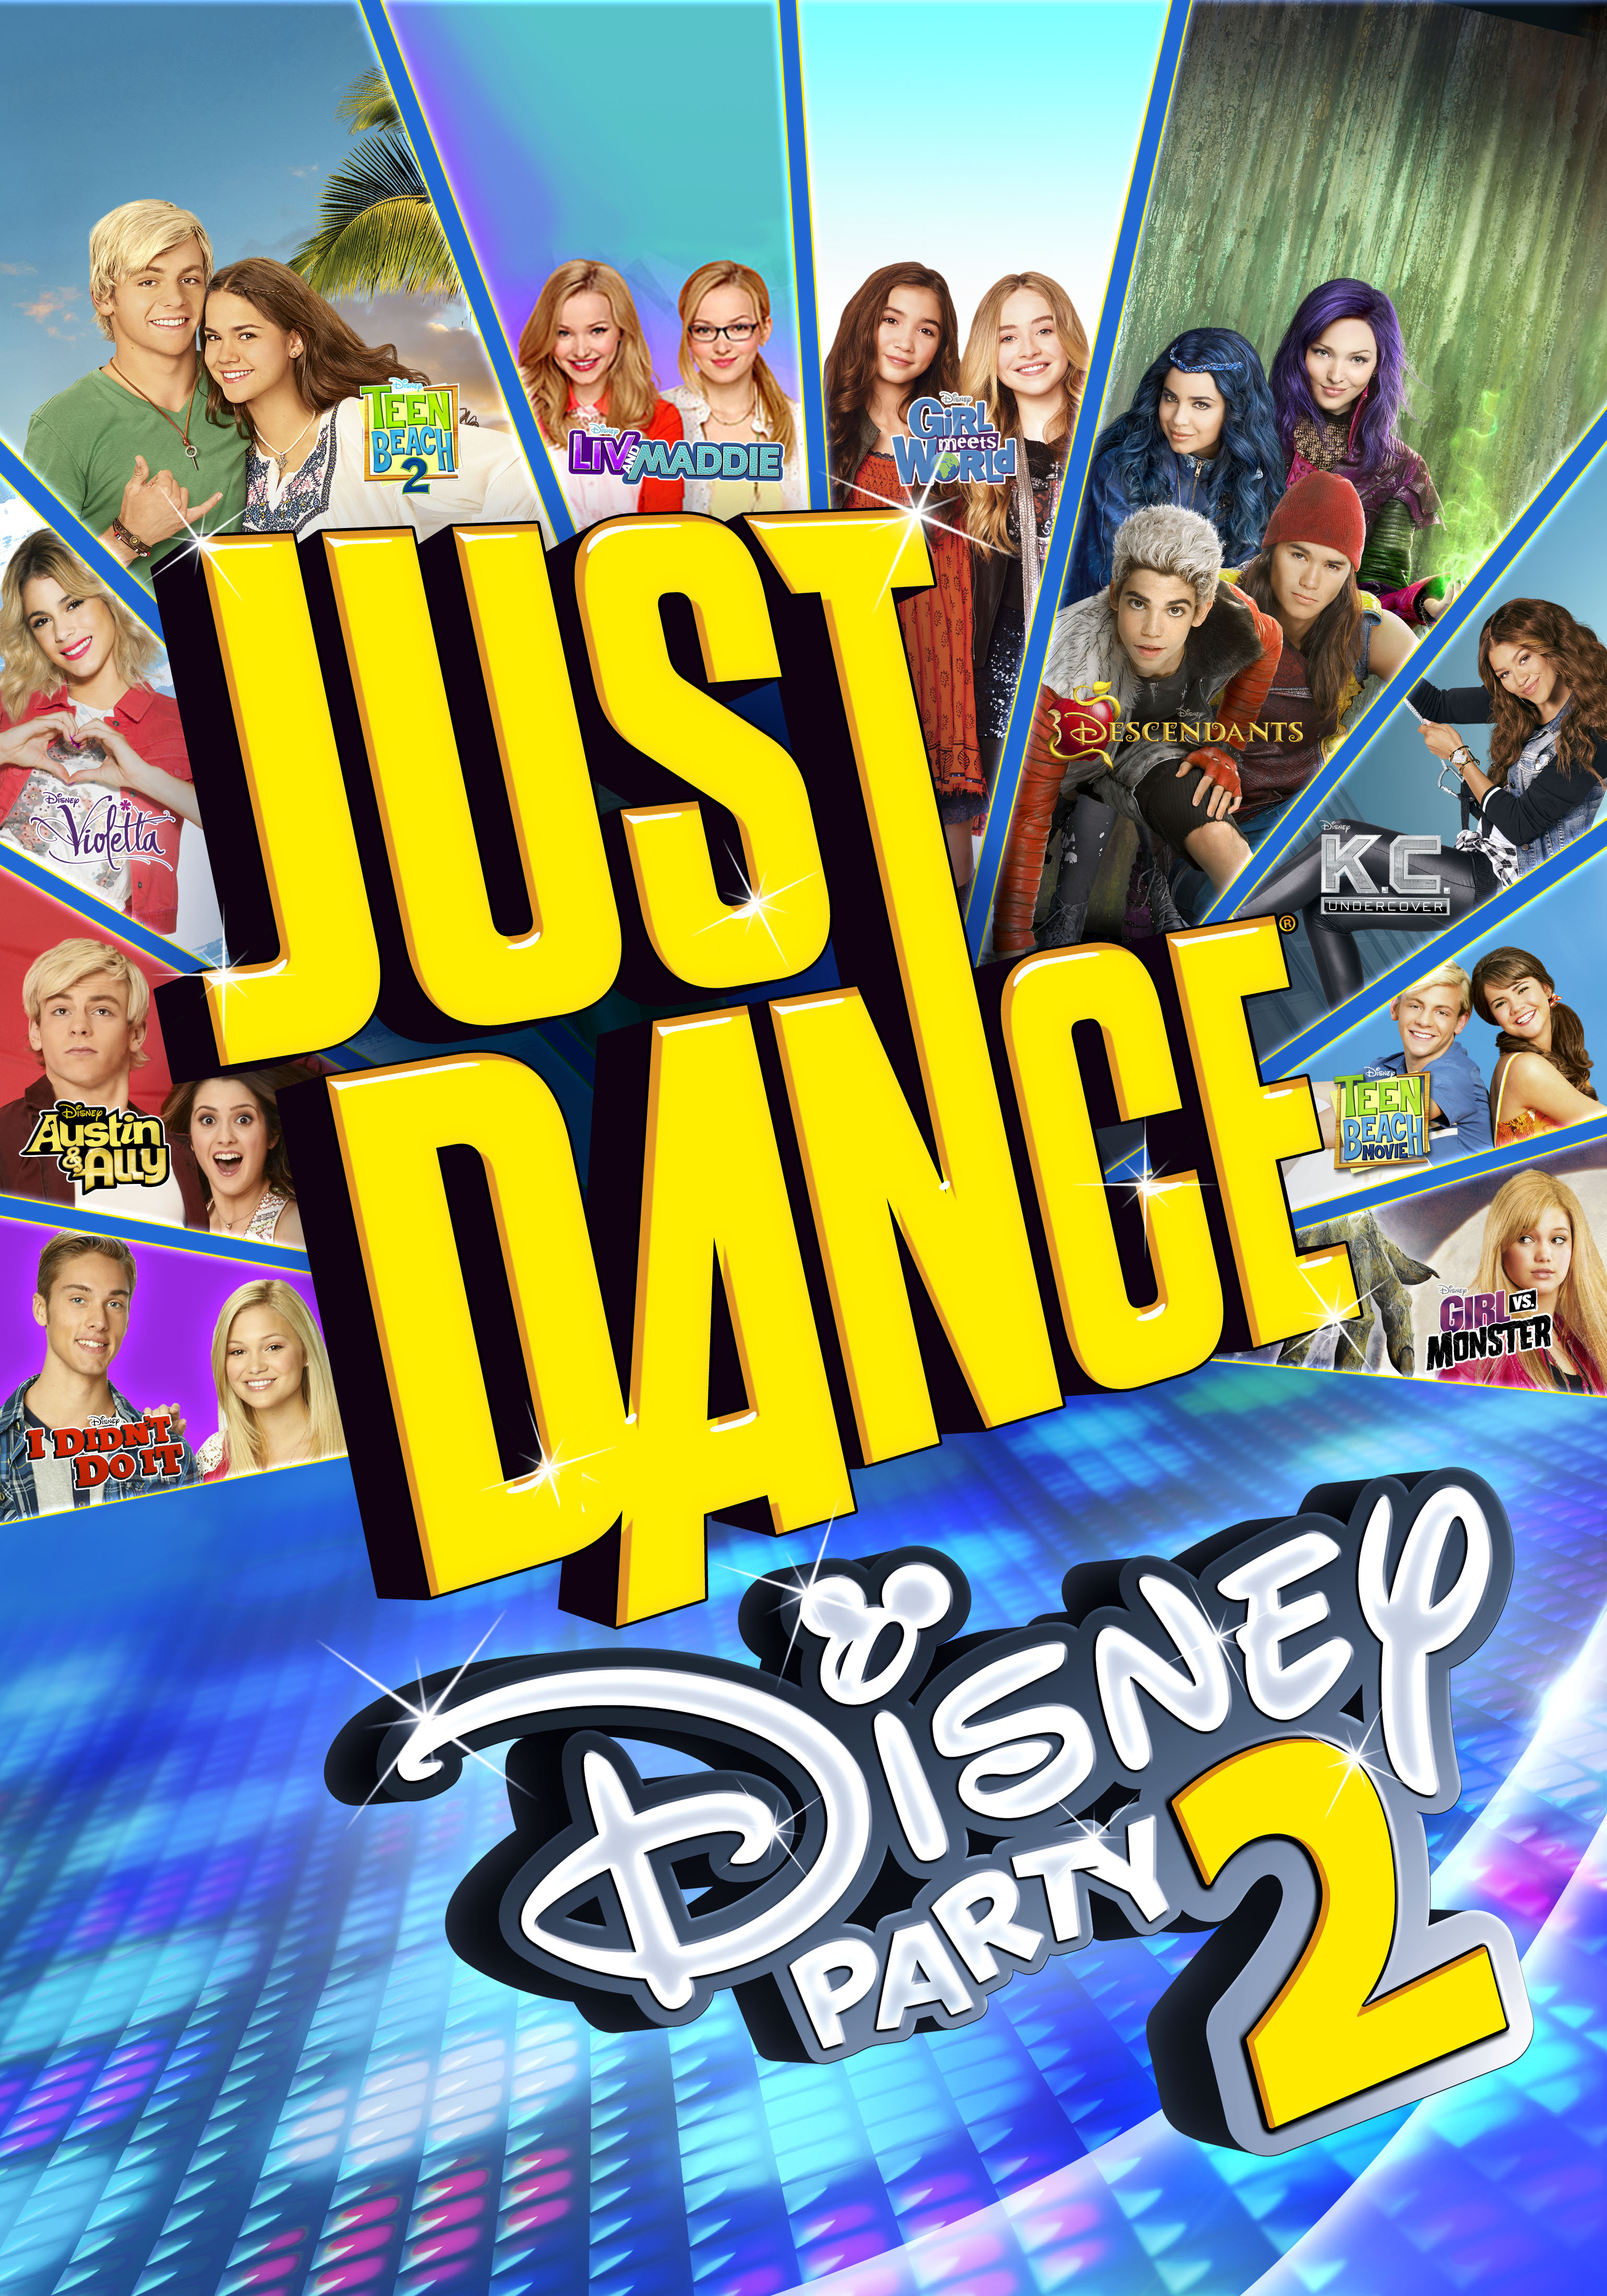 Ubisoft® And Disney Interactive Jump Back On The Dance Floor With Just Dance®: Disney Party 2